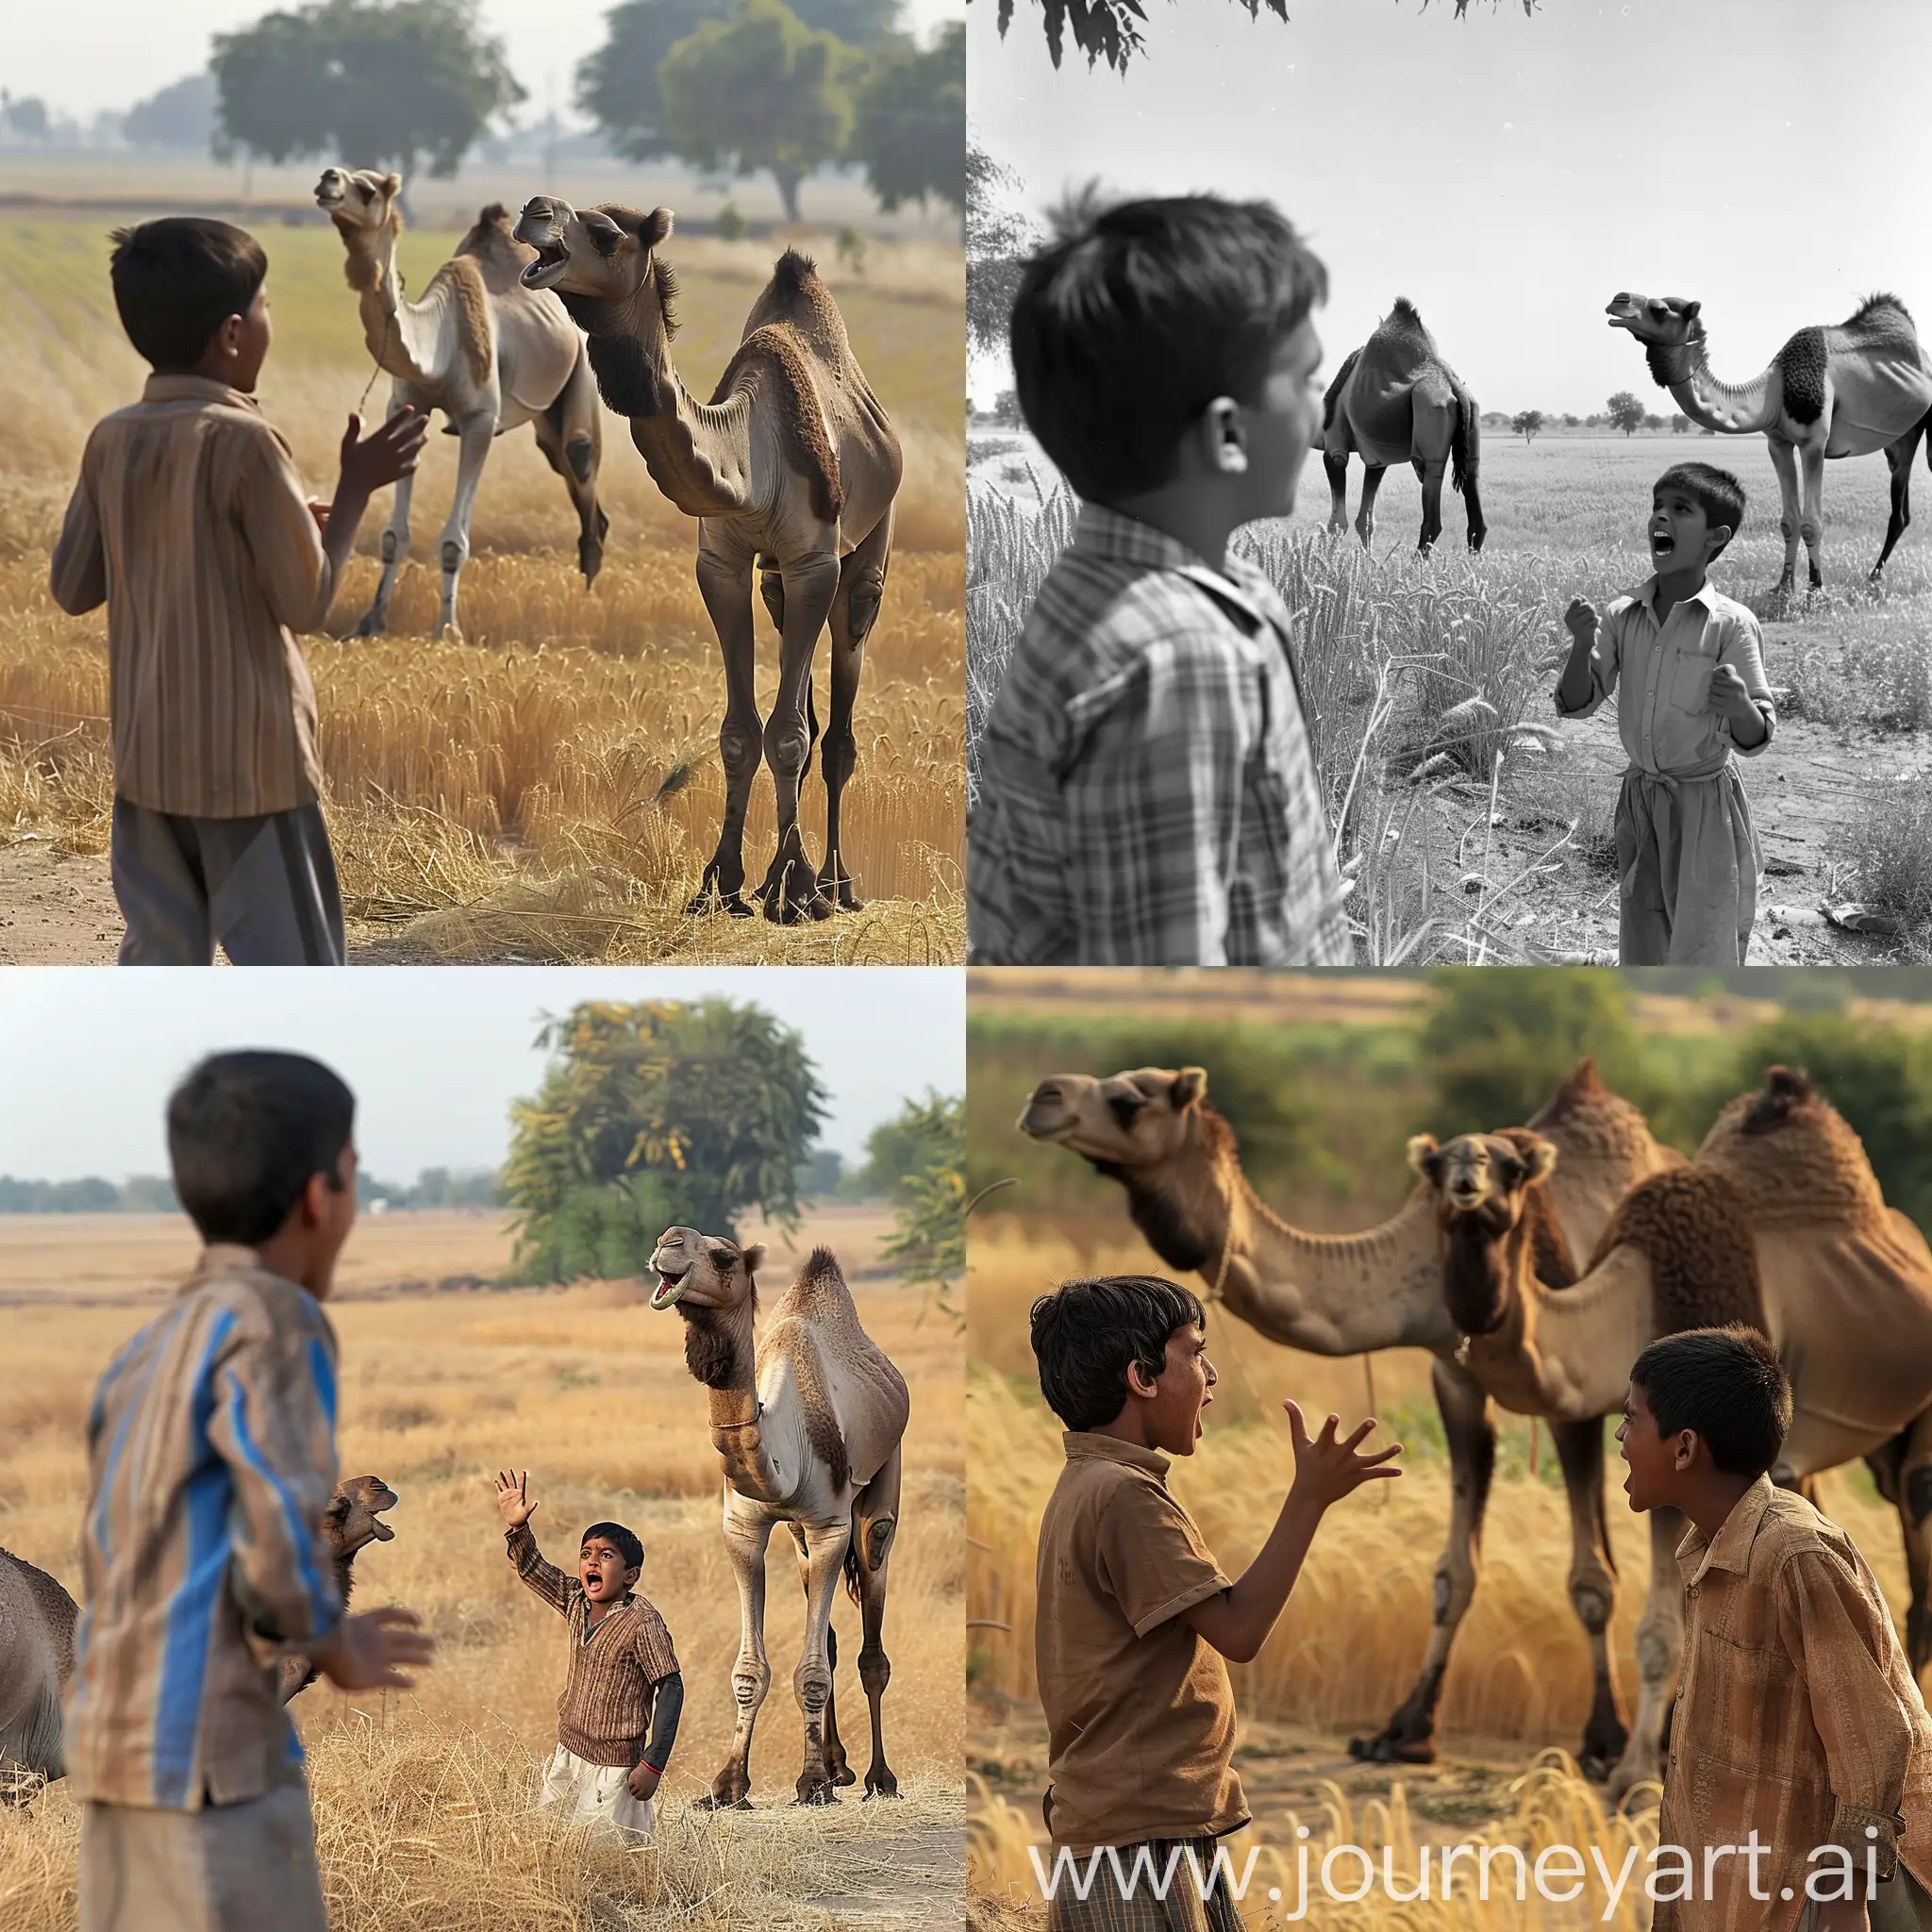 Imagine an indian village 15 year old boy shouting at marwari camelherd. 2 camels are grazing in a field of wheat in the background.